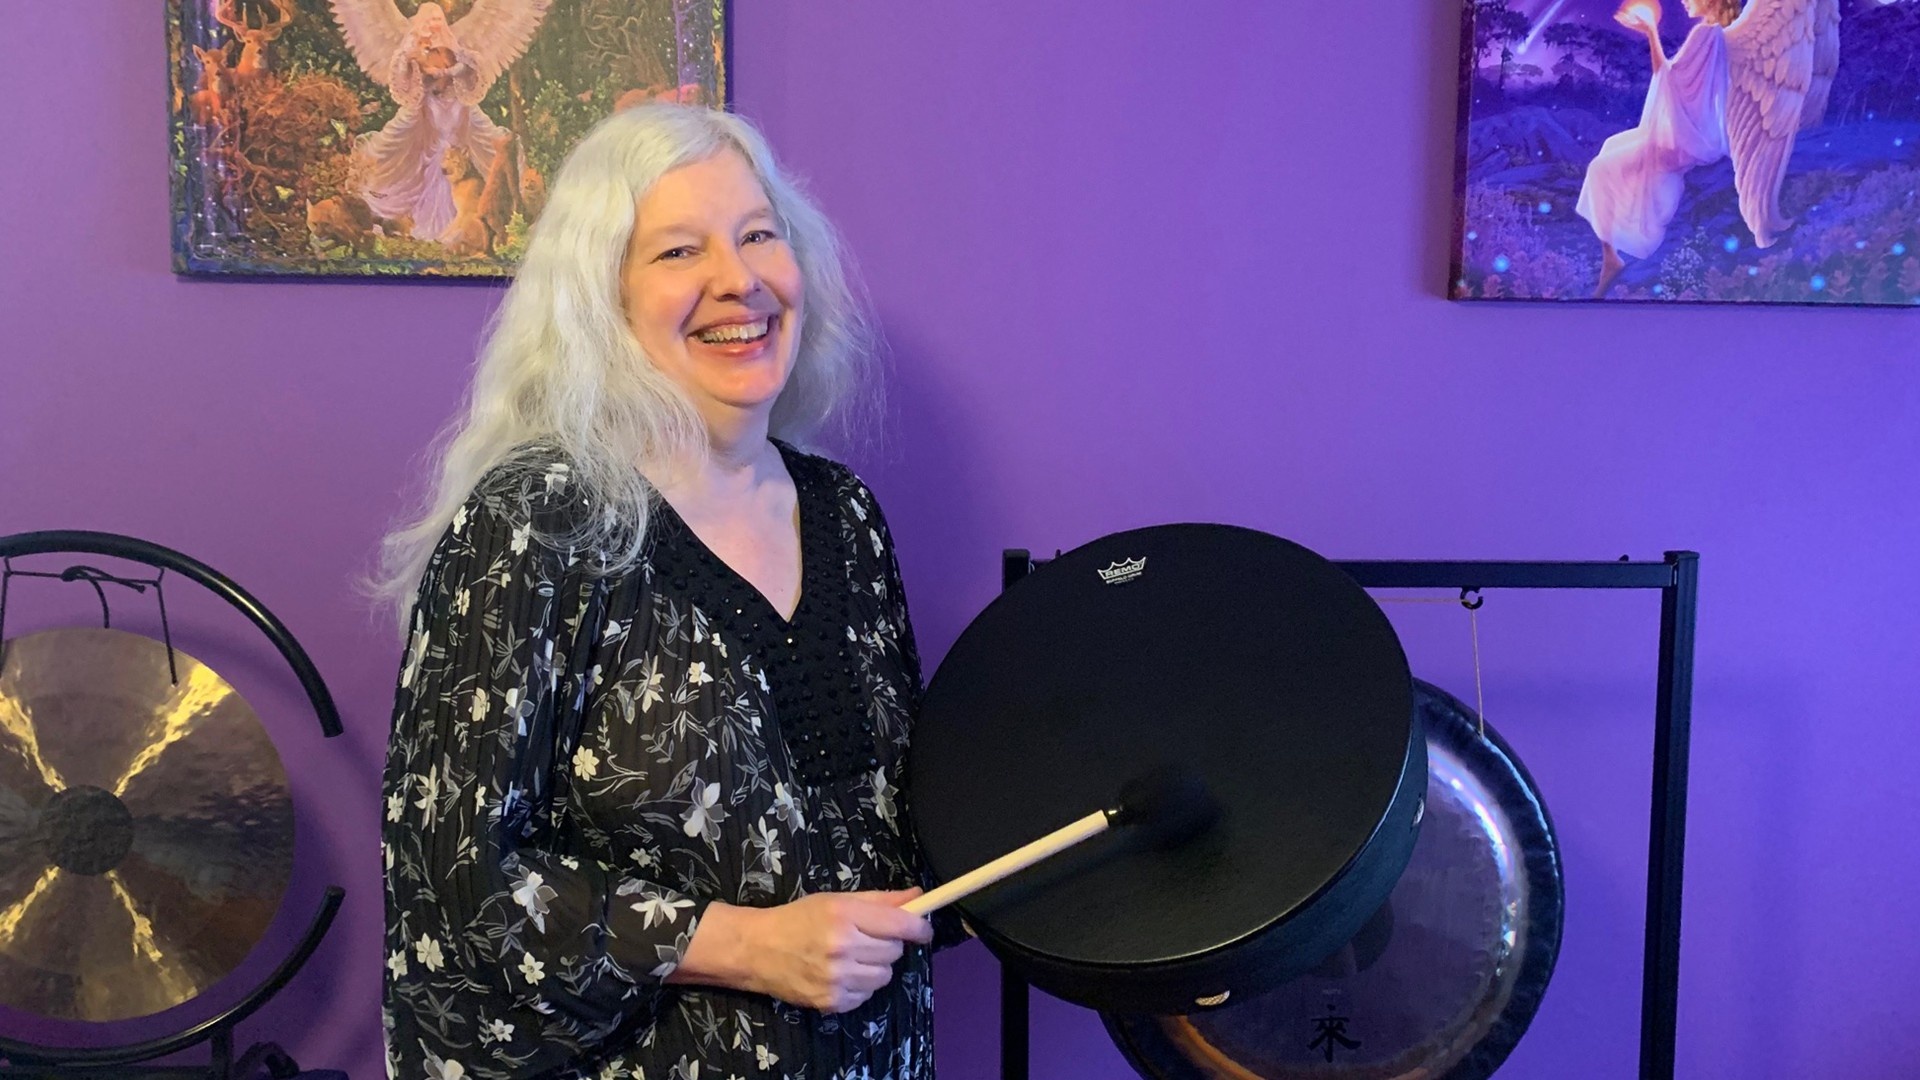 NEW YORK - Level 2 Diploma: Integral Sound Healing For Working 1-2-1 With Client